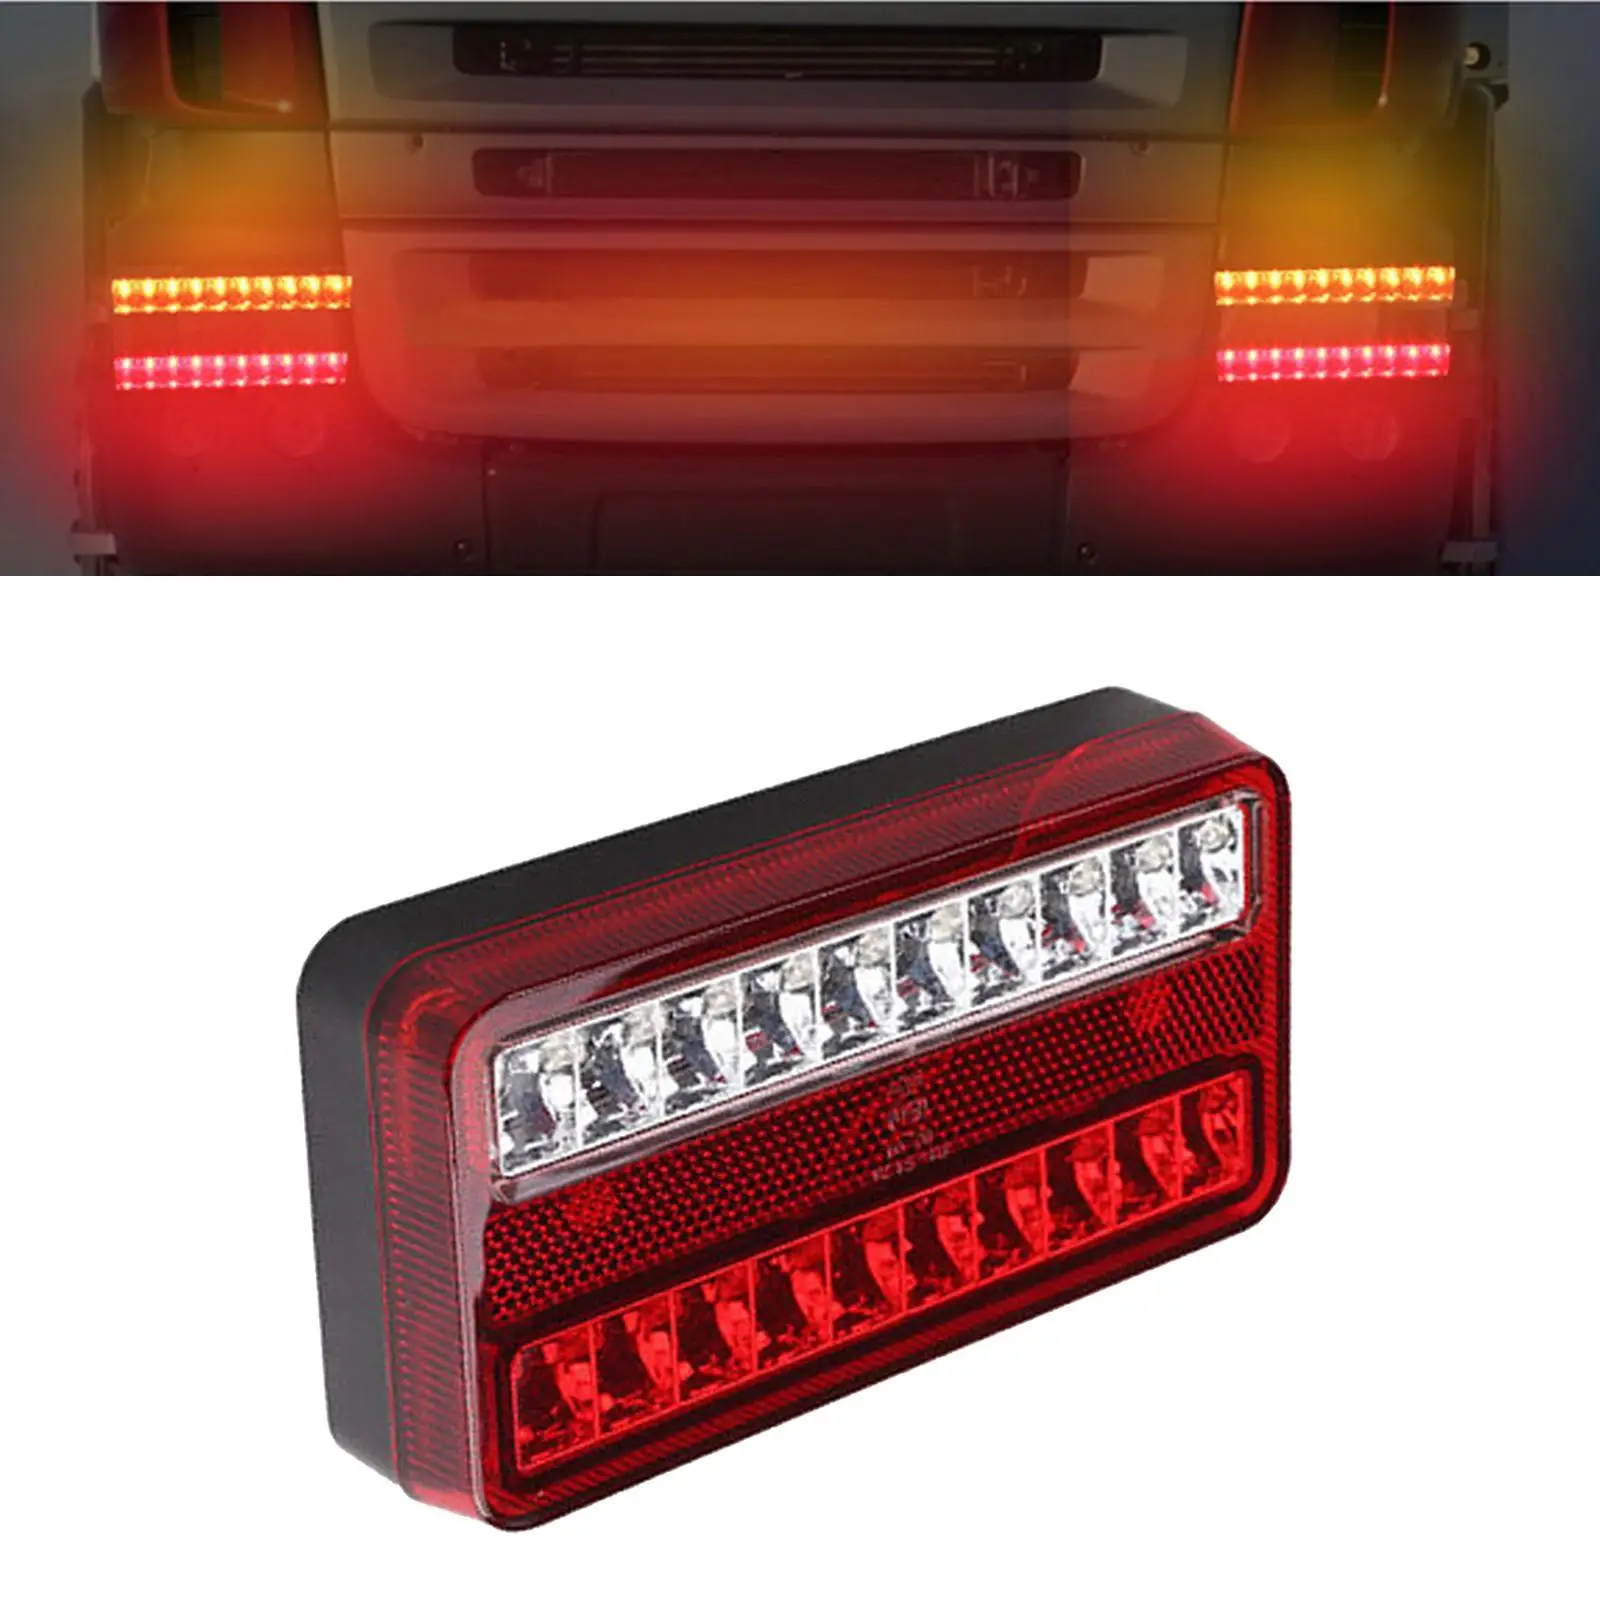 Portable Indicator Tail Lights 12.8V Spare Parts Replaces LED Waterproof 300LM Rear Reverse Turn Signal Lamp for Camper Van